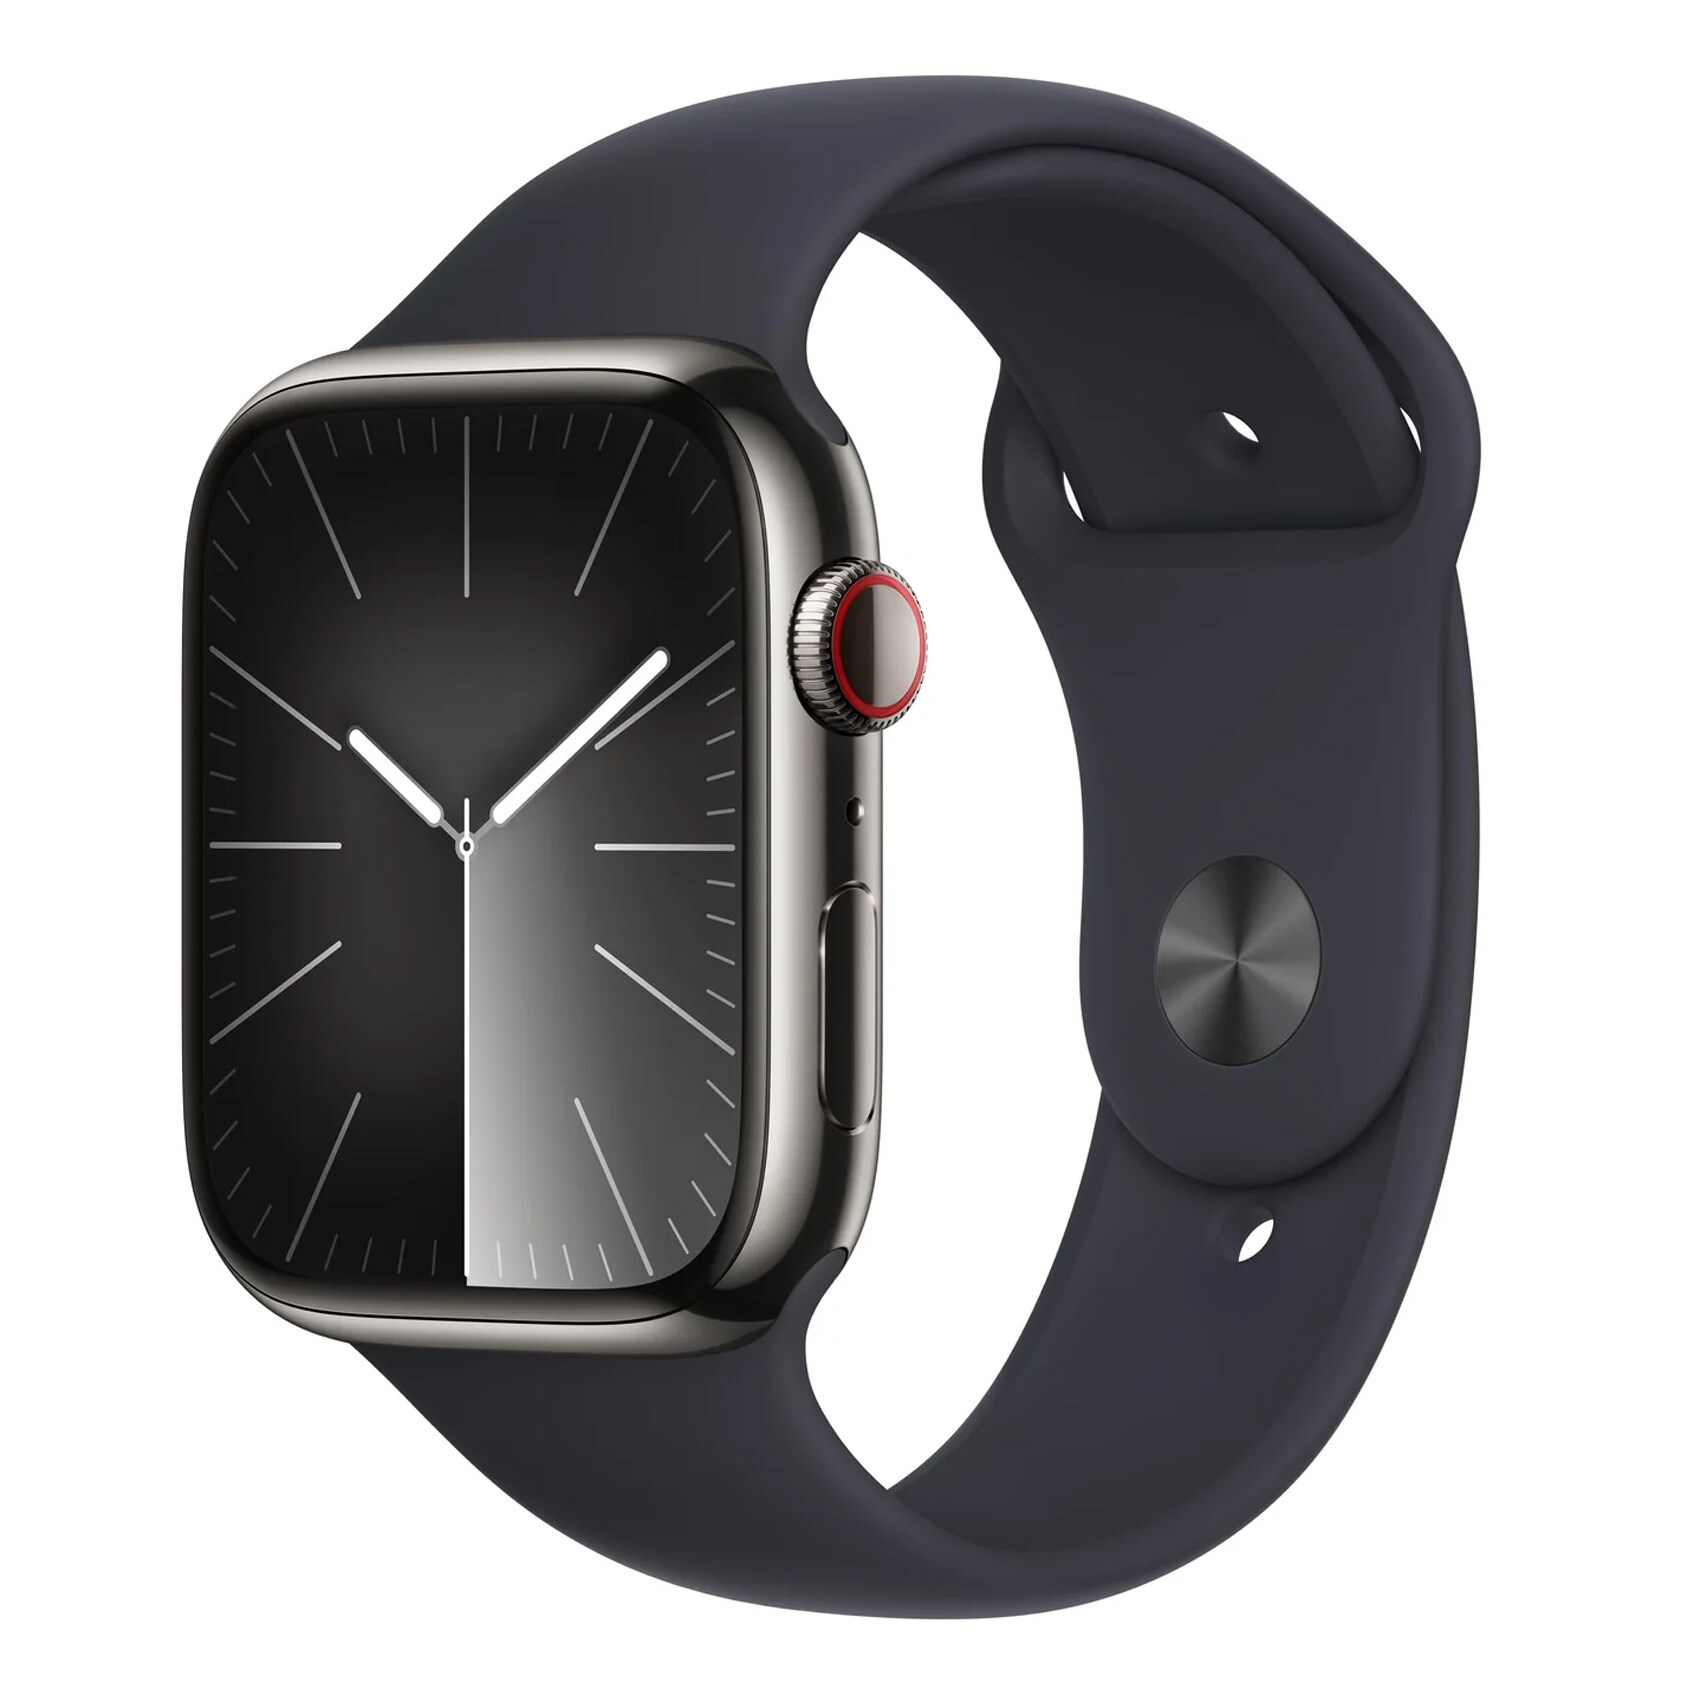 Buy Smart Watches & Wearables Online - Shop on Carrefour Kuwait